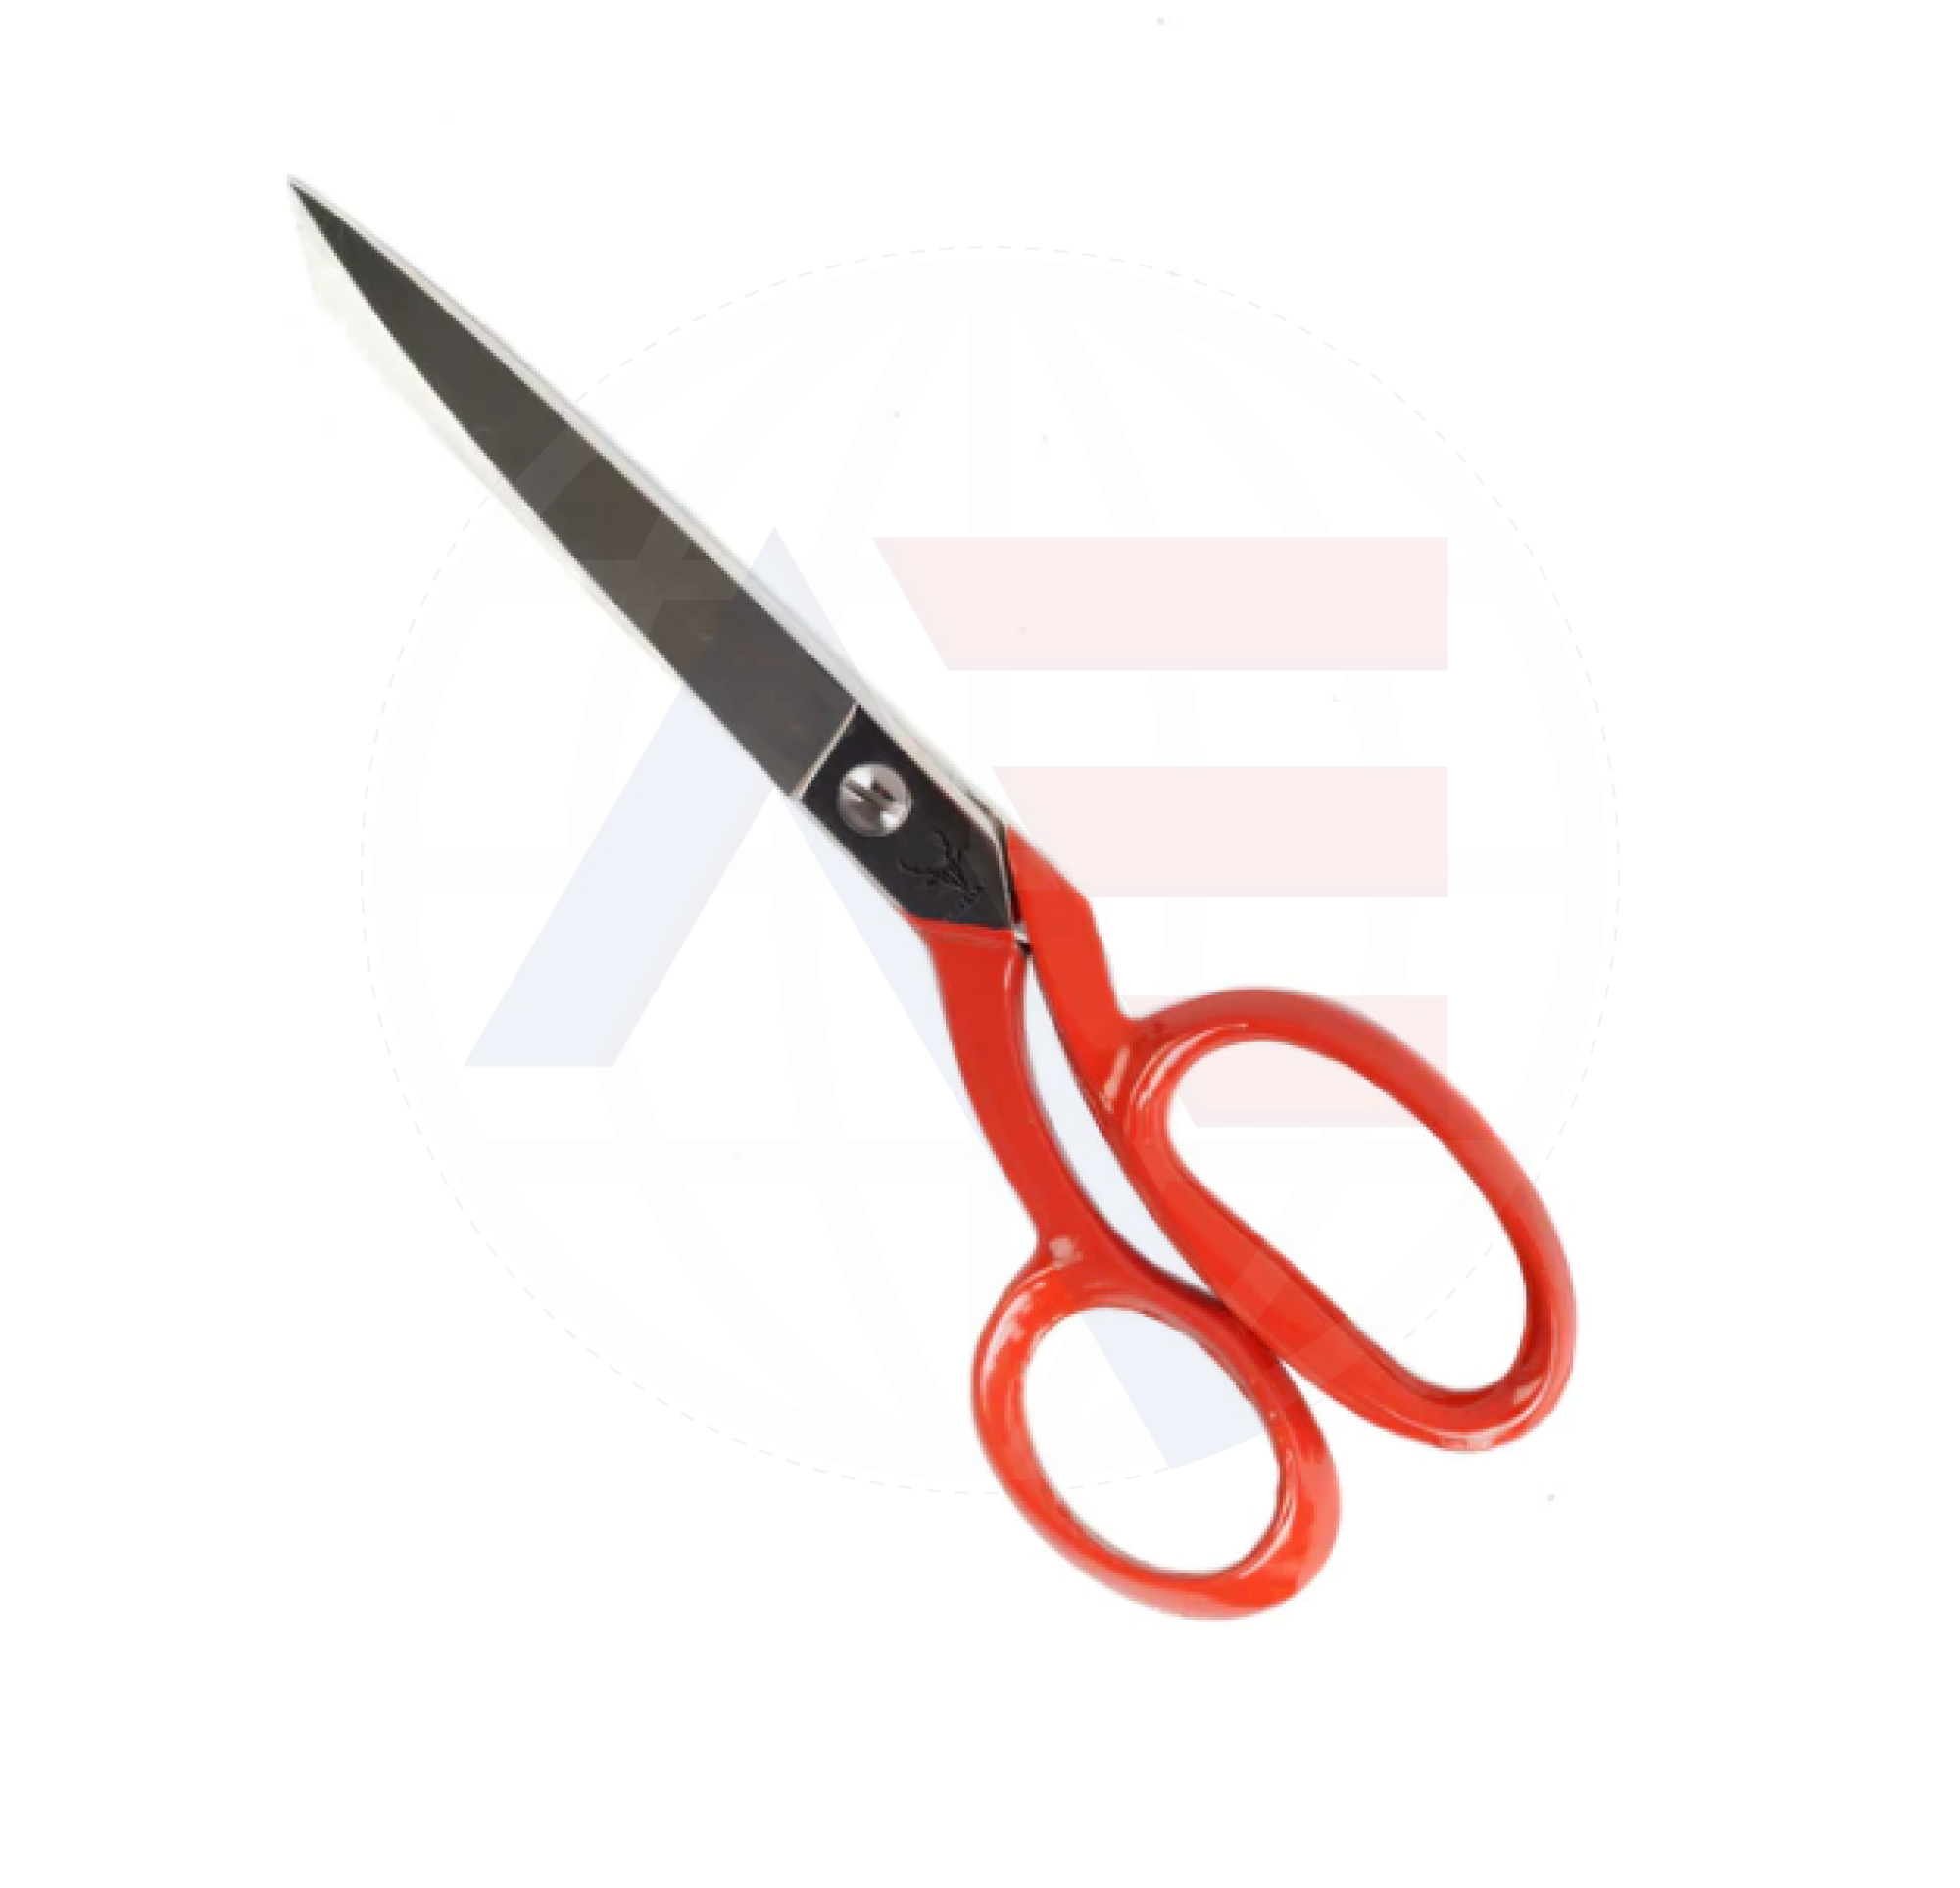 Elk 8 Left Handed Tailors Shears With Lower Serrated Blades